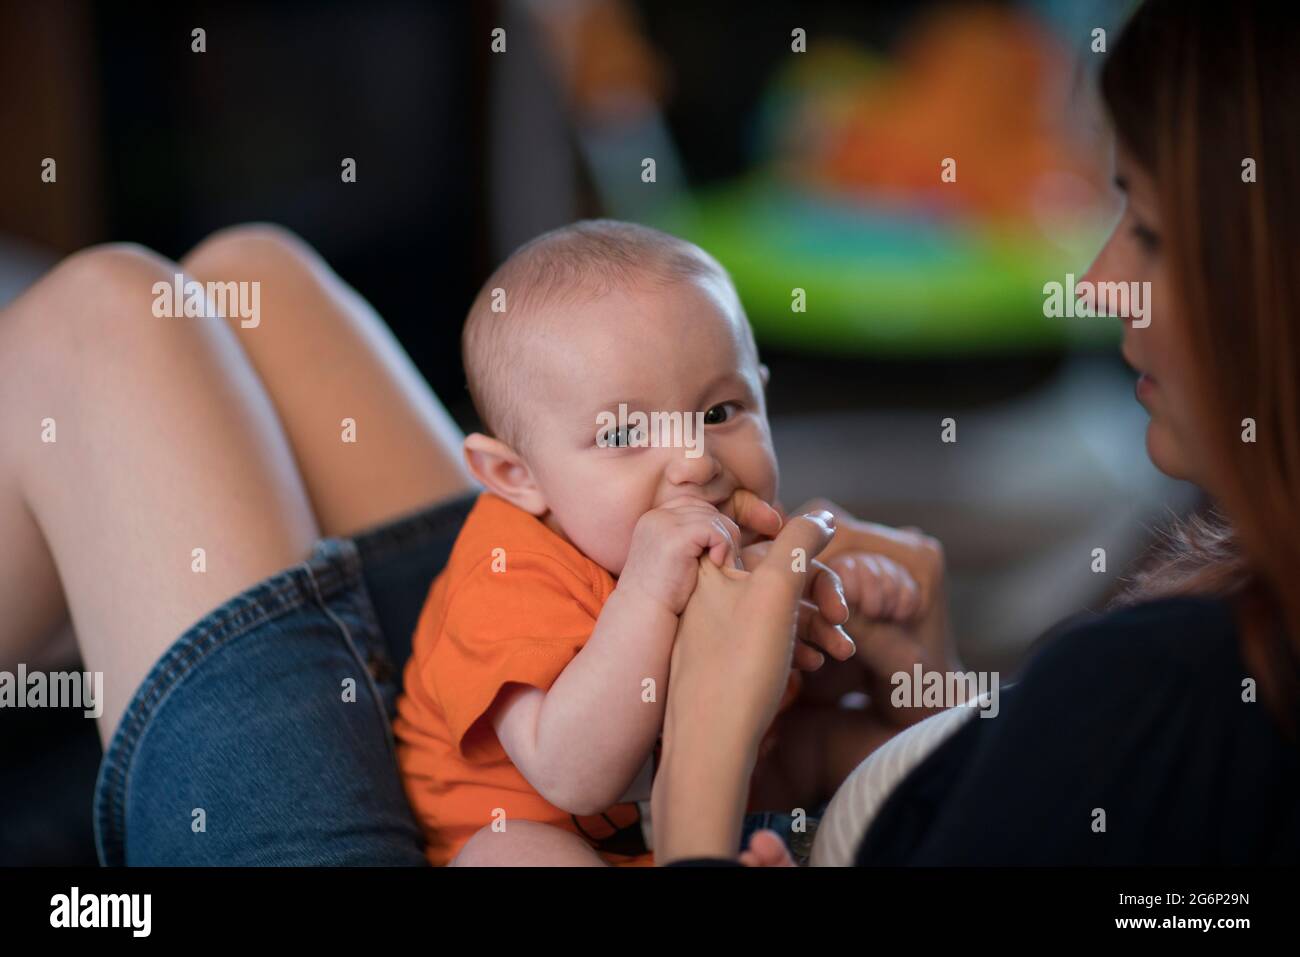 A teething baby biting his mother's finger Stock Photo